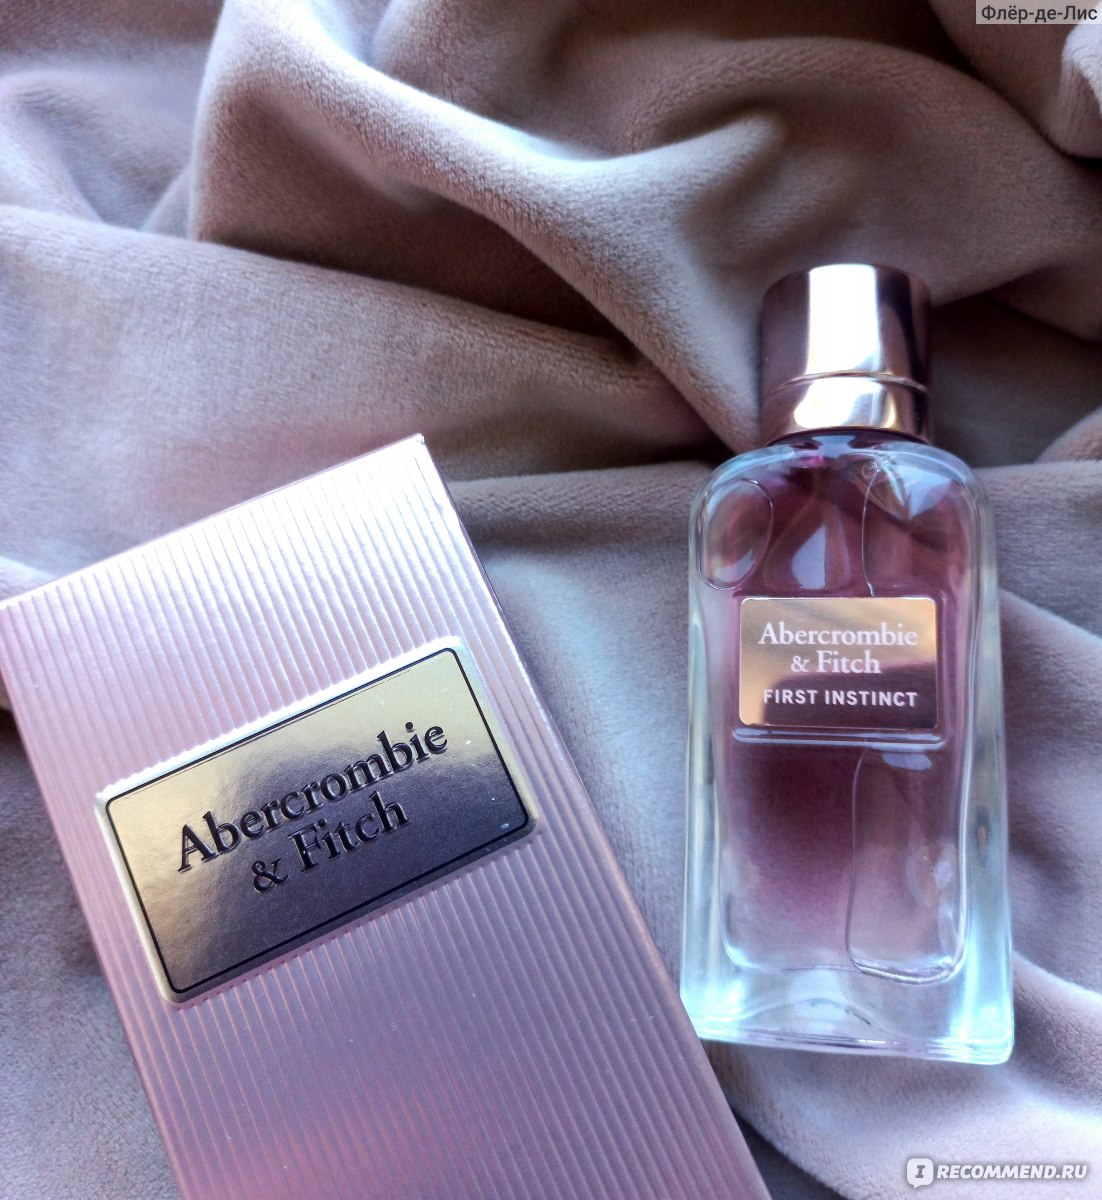 Abercrombie fitch authentic women парфюмерная вода. Abercrombie and Fitch first Instinct женские. Abercrombie Fitch first Instinct for her. Abercrombie & Fitch first Instinct for her 30 мл. Abercrombie Fitch парфюмерная вода first Instinct woman, 30 мл.